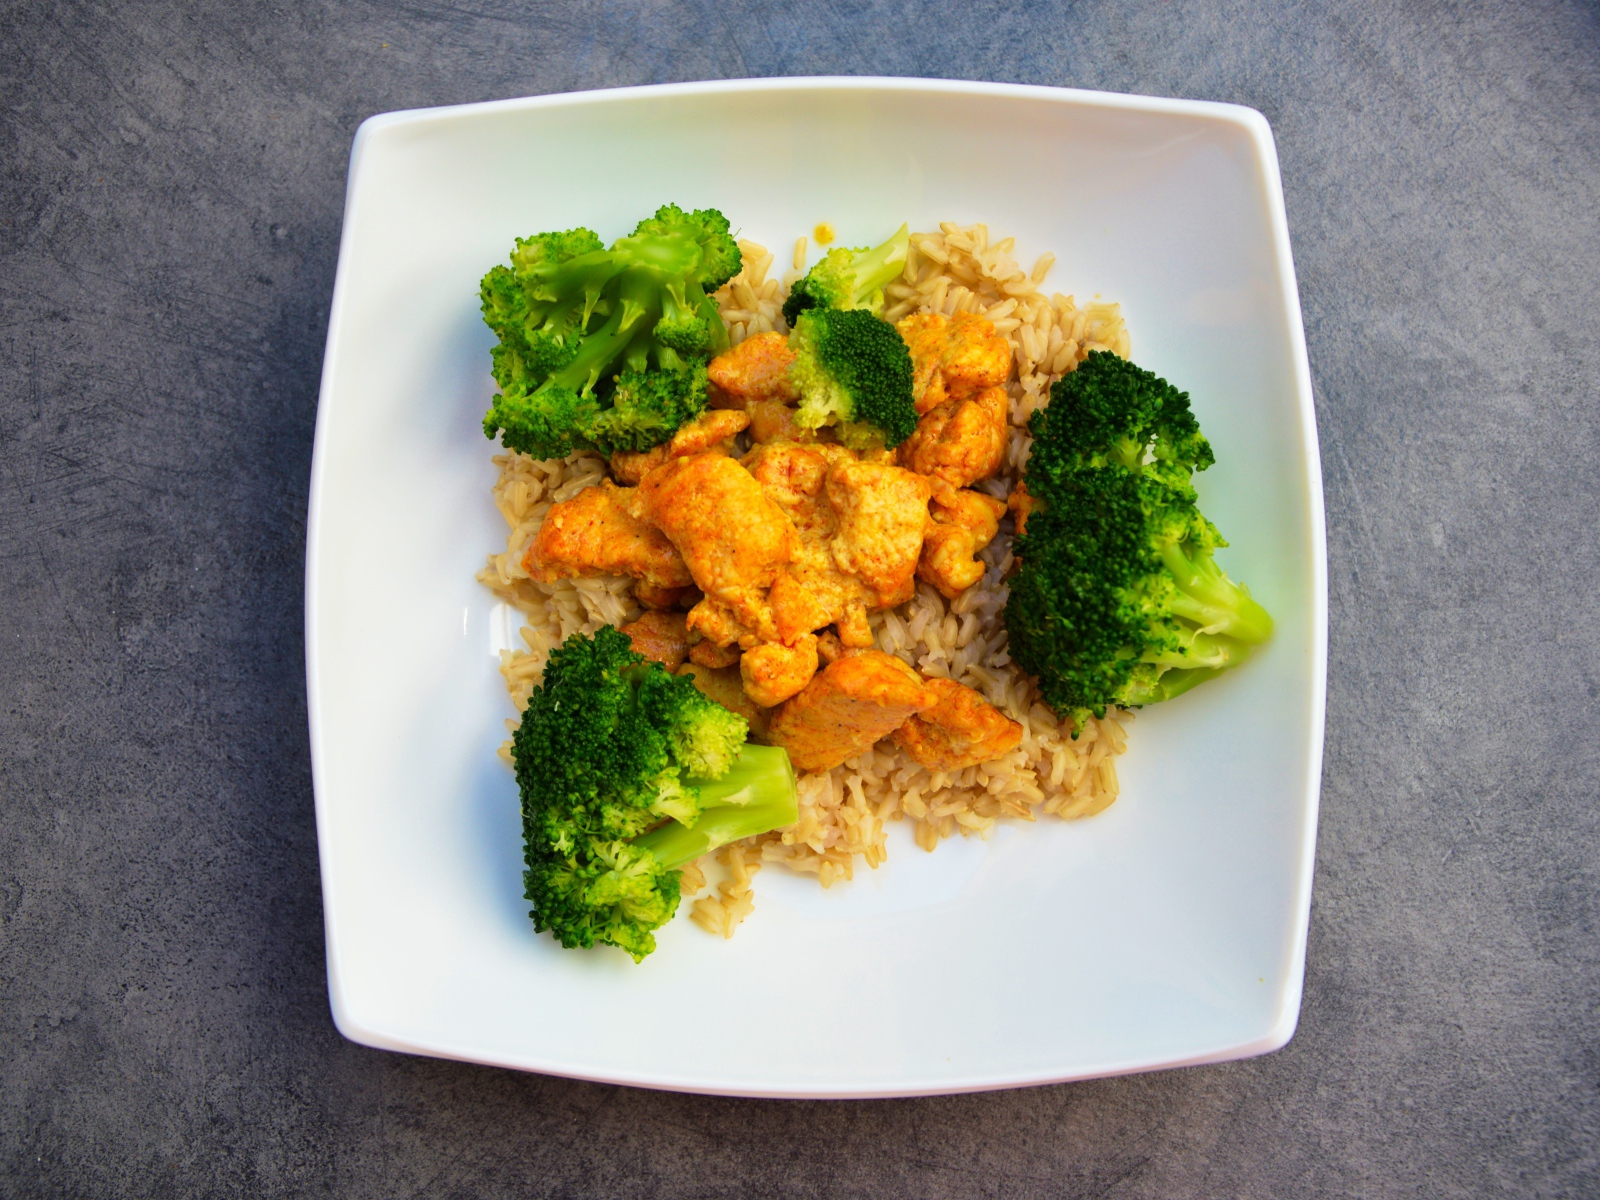 Rice with meat and broccoli in a white plate